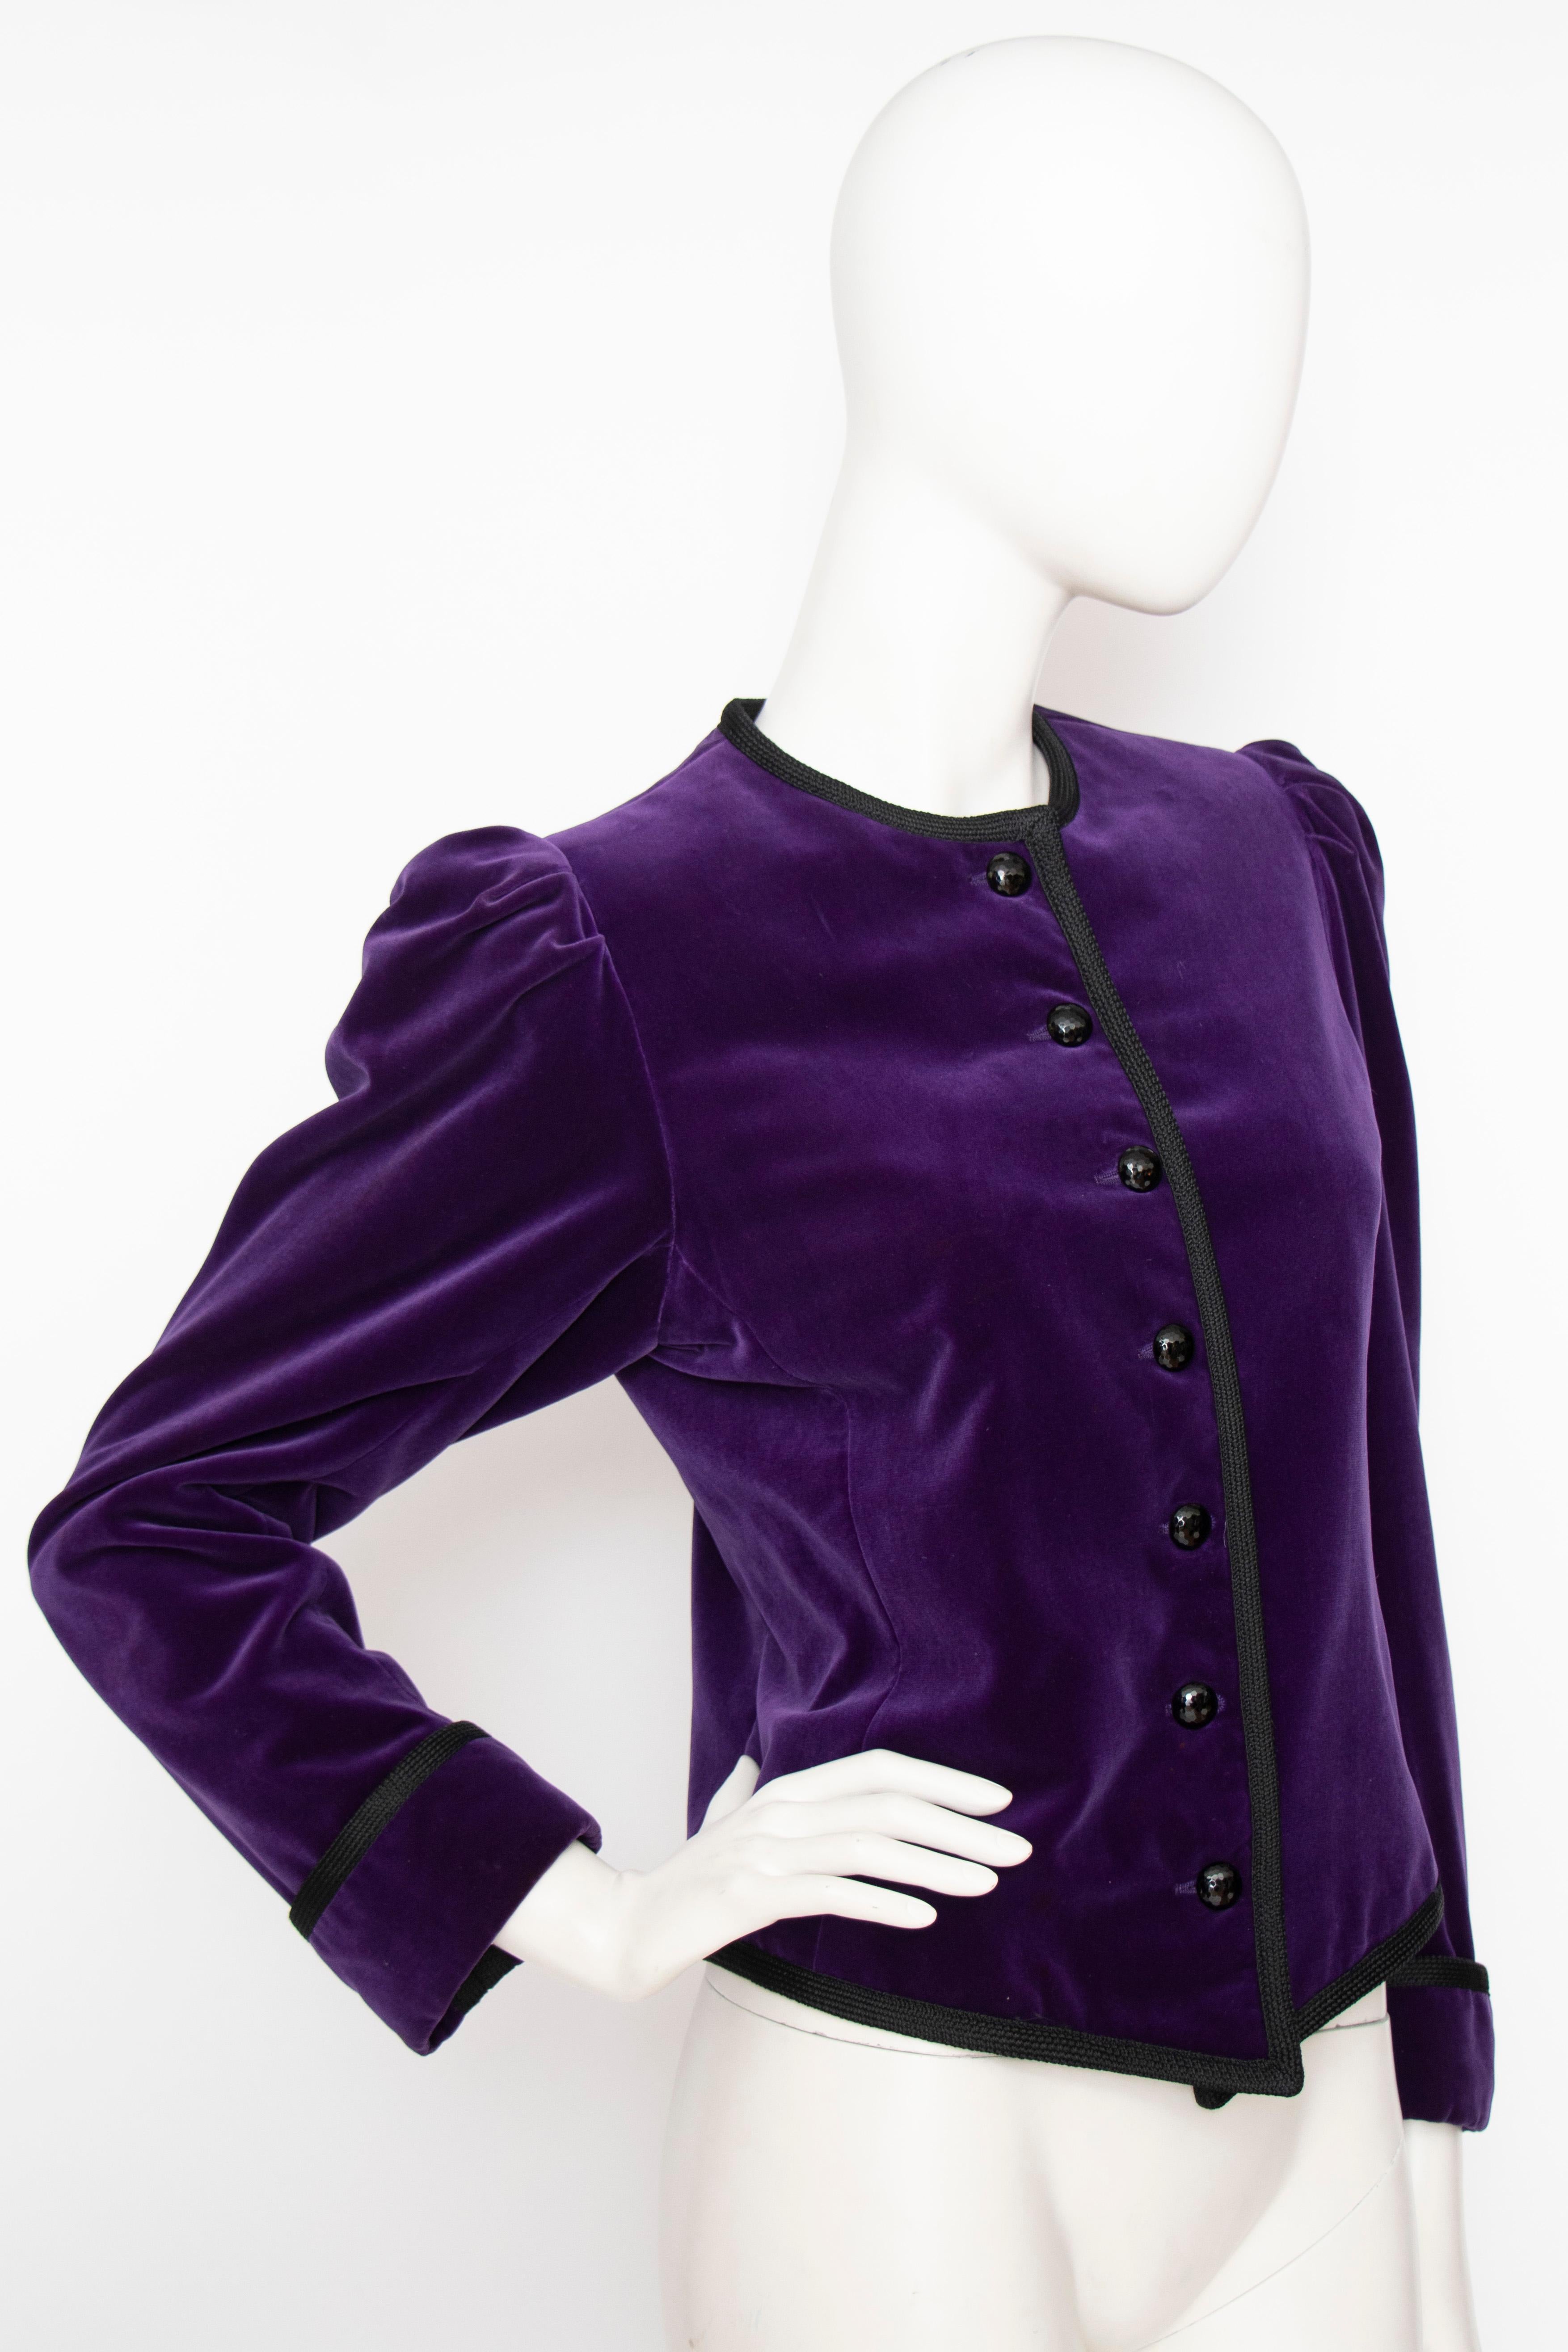 A 1970s vintage Yves Saint Laurent Rive Gauche purple velvet jacket with black facetted buttons, puffed shoulders and black trim detailing. 

The jacket is fully lined and the size corresponds to a modern size extra small. 

